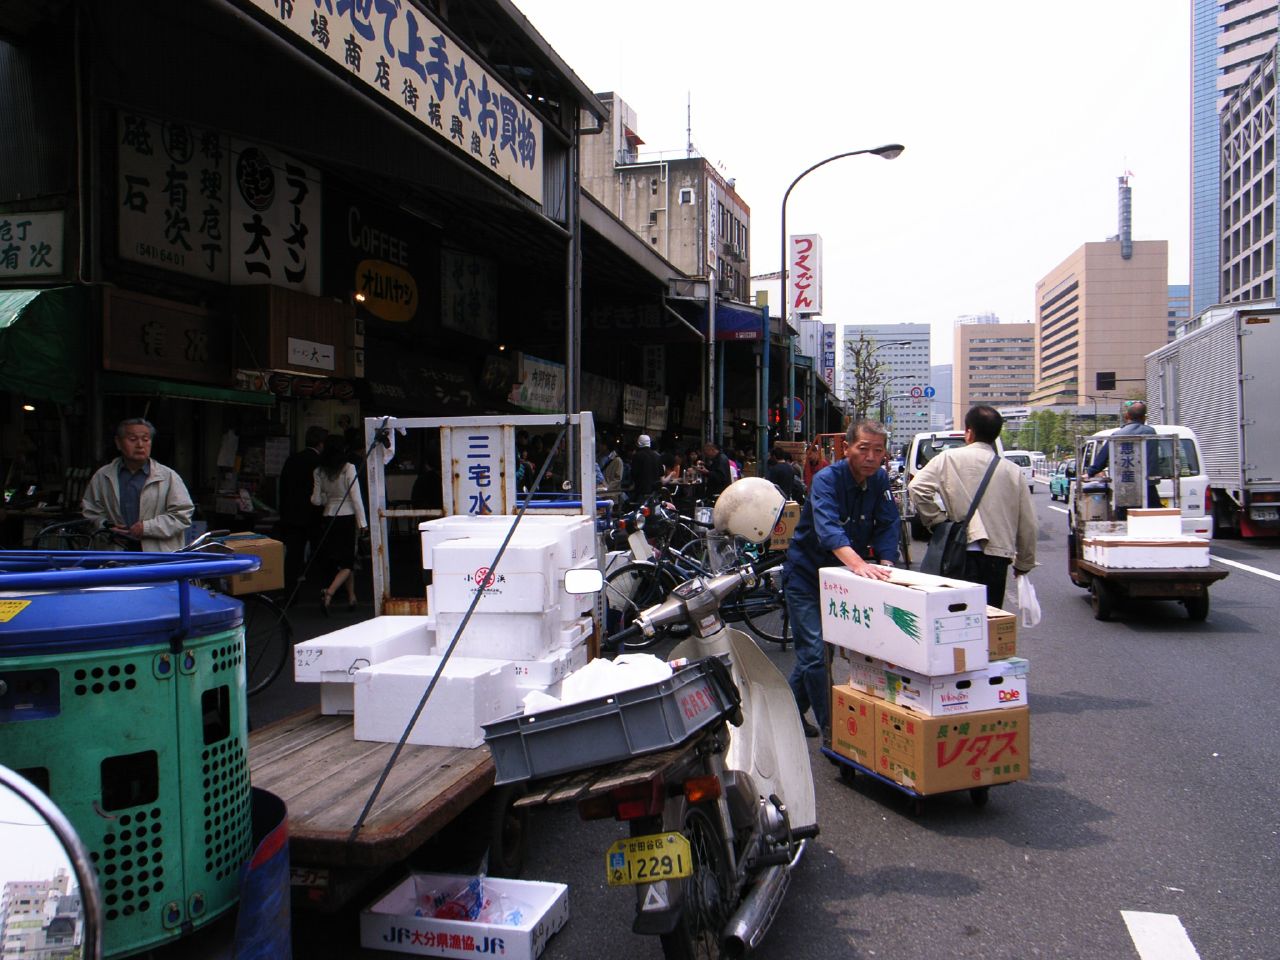 many people are on the street shopping and some with luggage